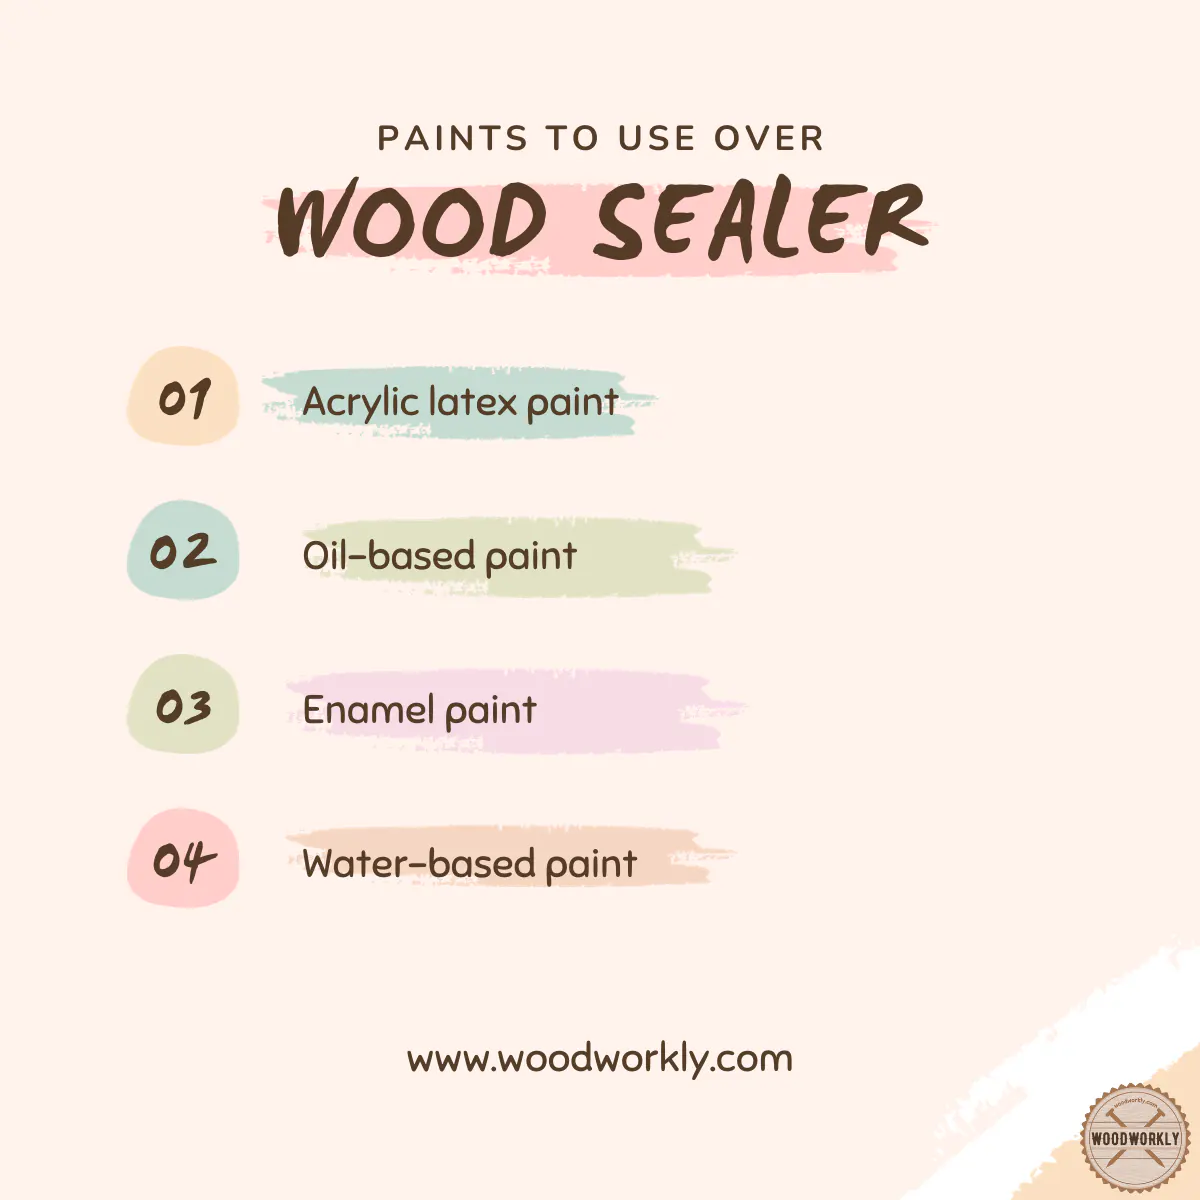 Paint types to use over wood sealer